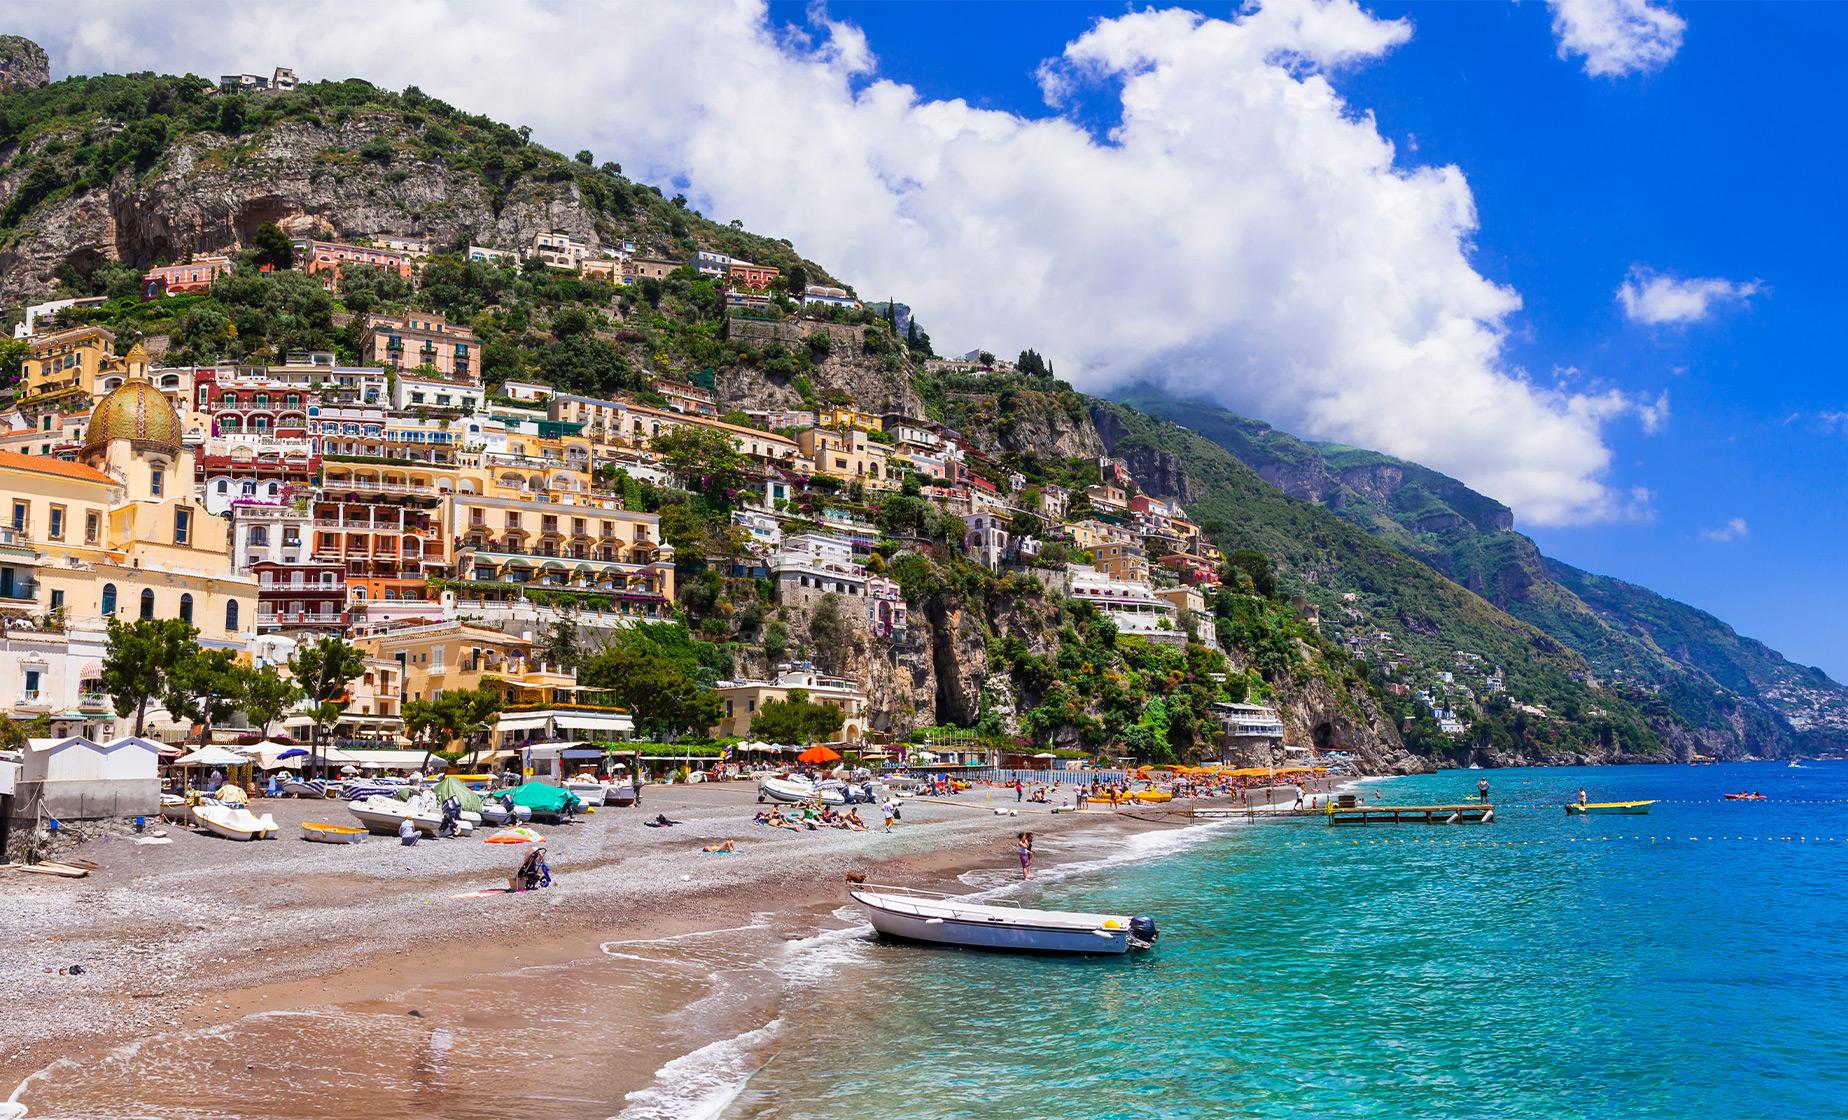 Discover Positano and Amalfi by Boat